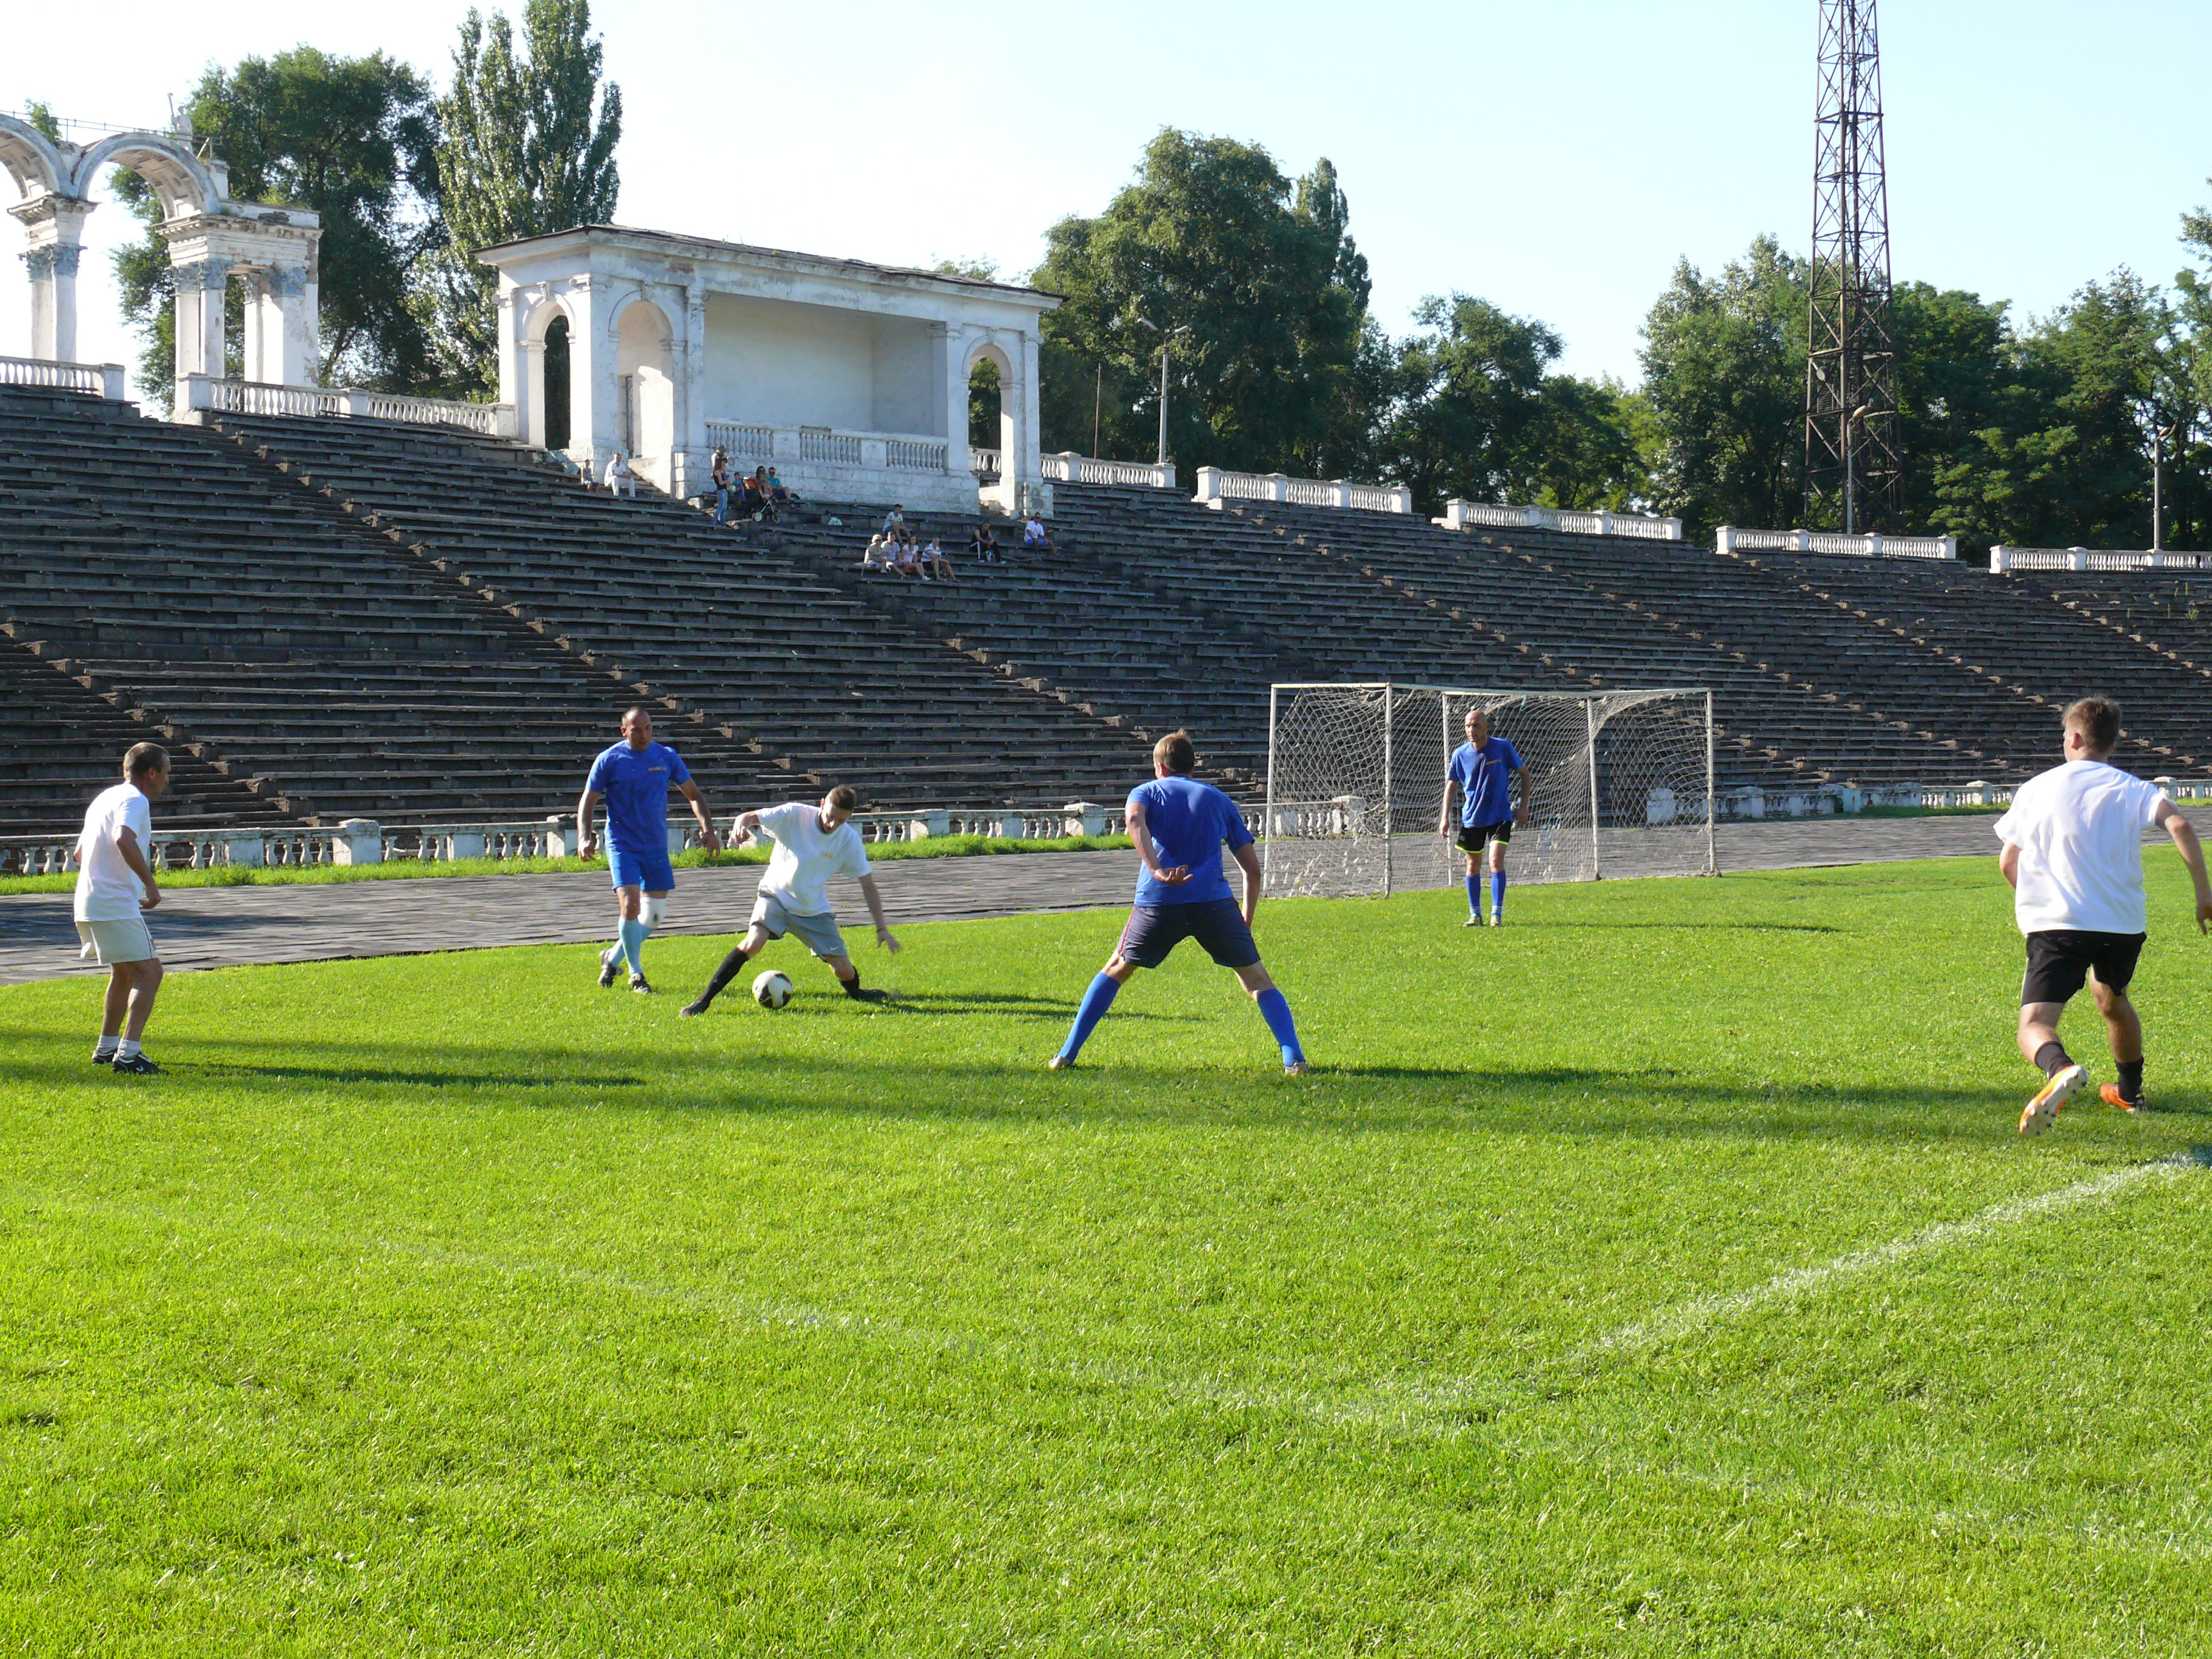 The football match was dedicated to the 25th anniversary of the company "Keramet."